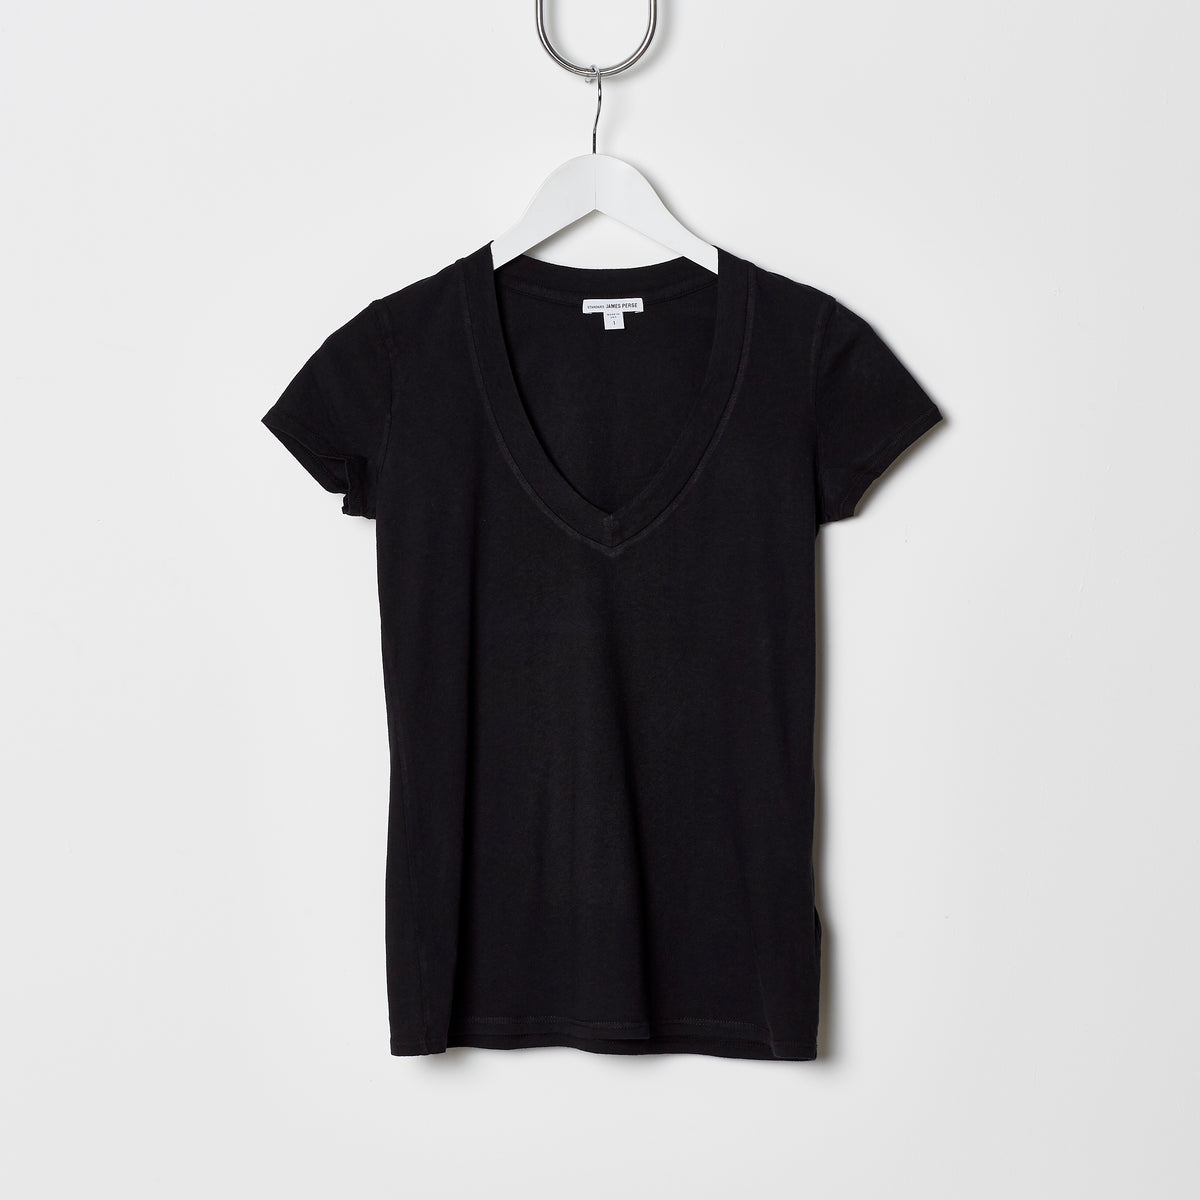 James Perse Relaxed V Neck Tee - Black